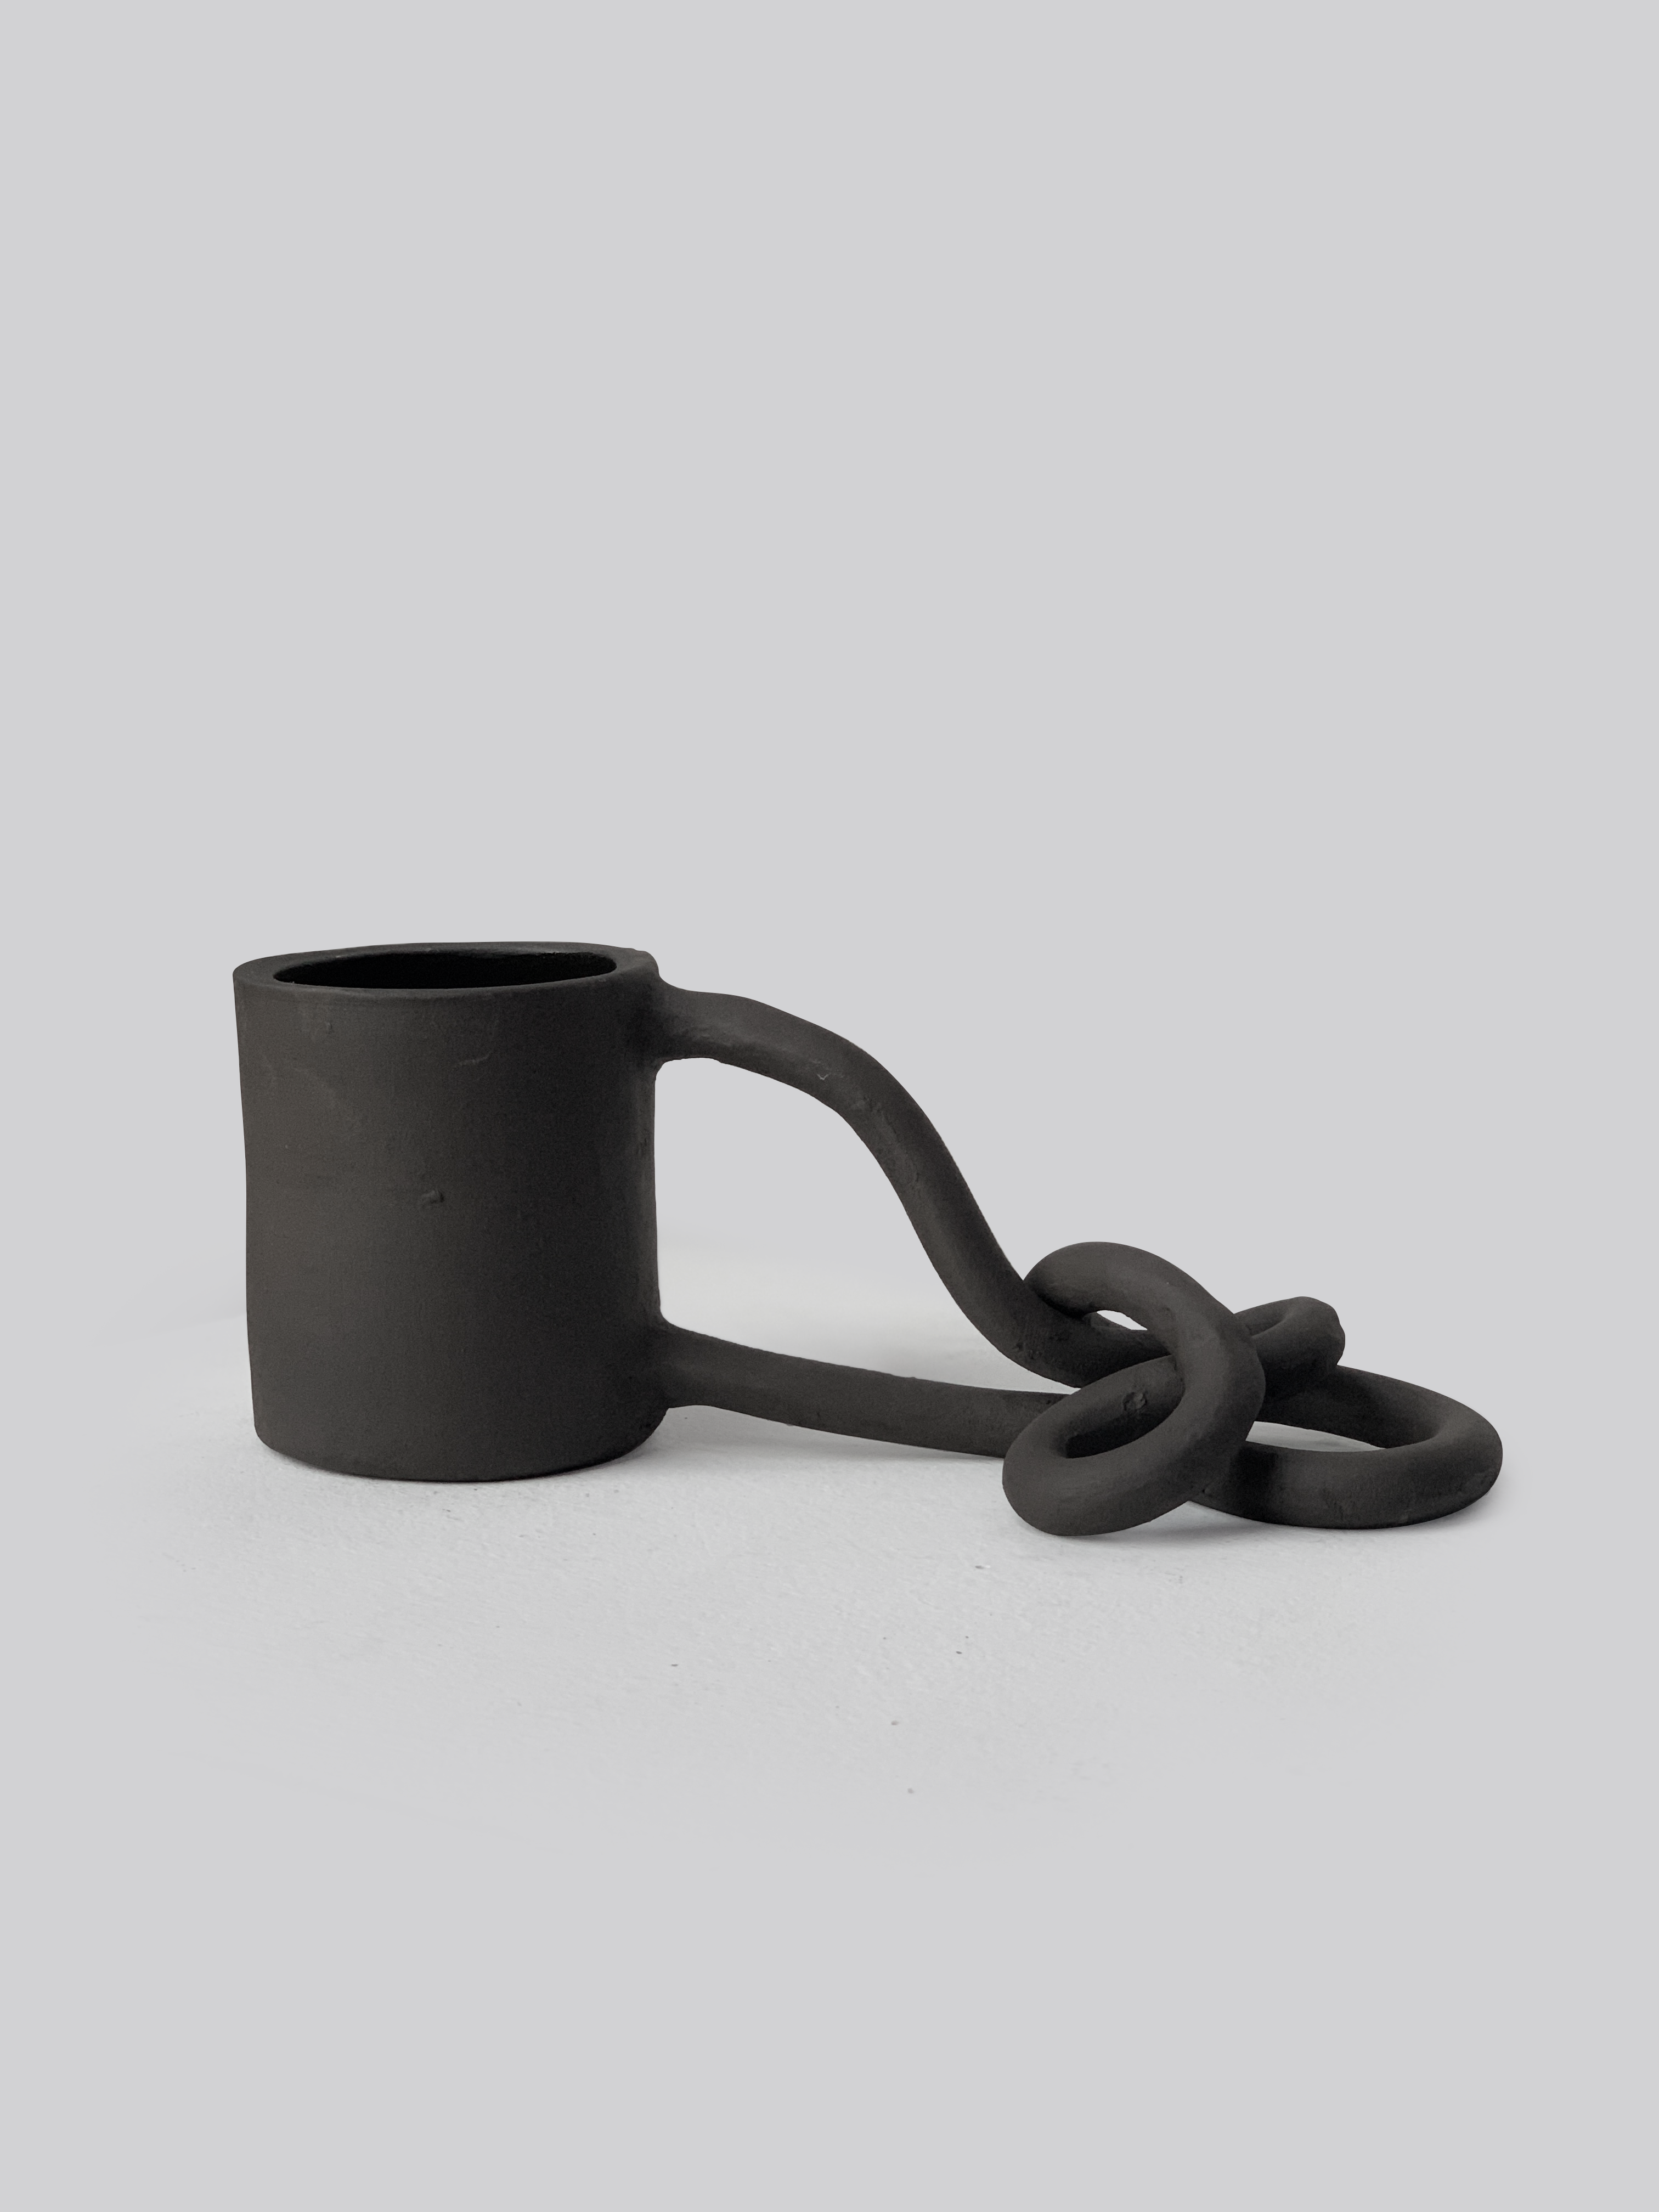 Black matte stoneware ceramic mug with a handle that flows down and loops around itself and rests on a surface.